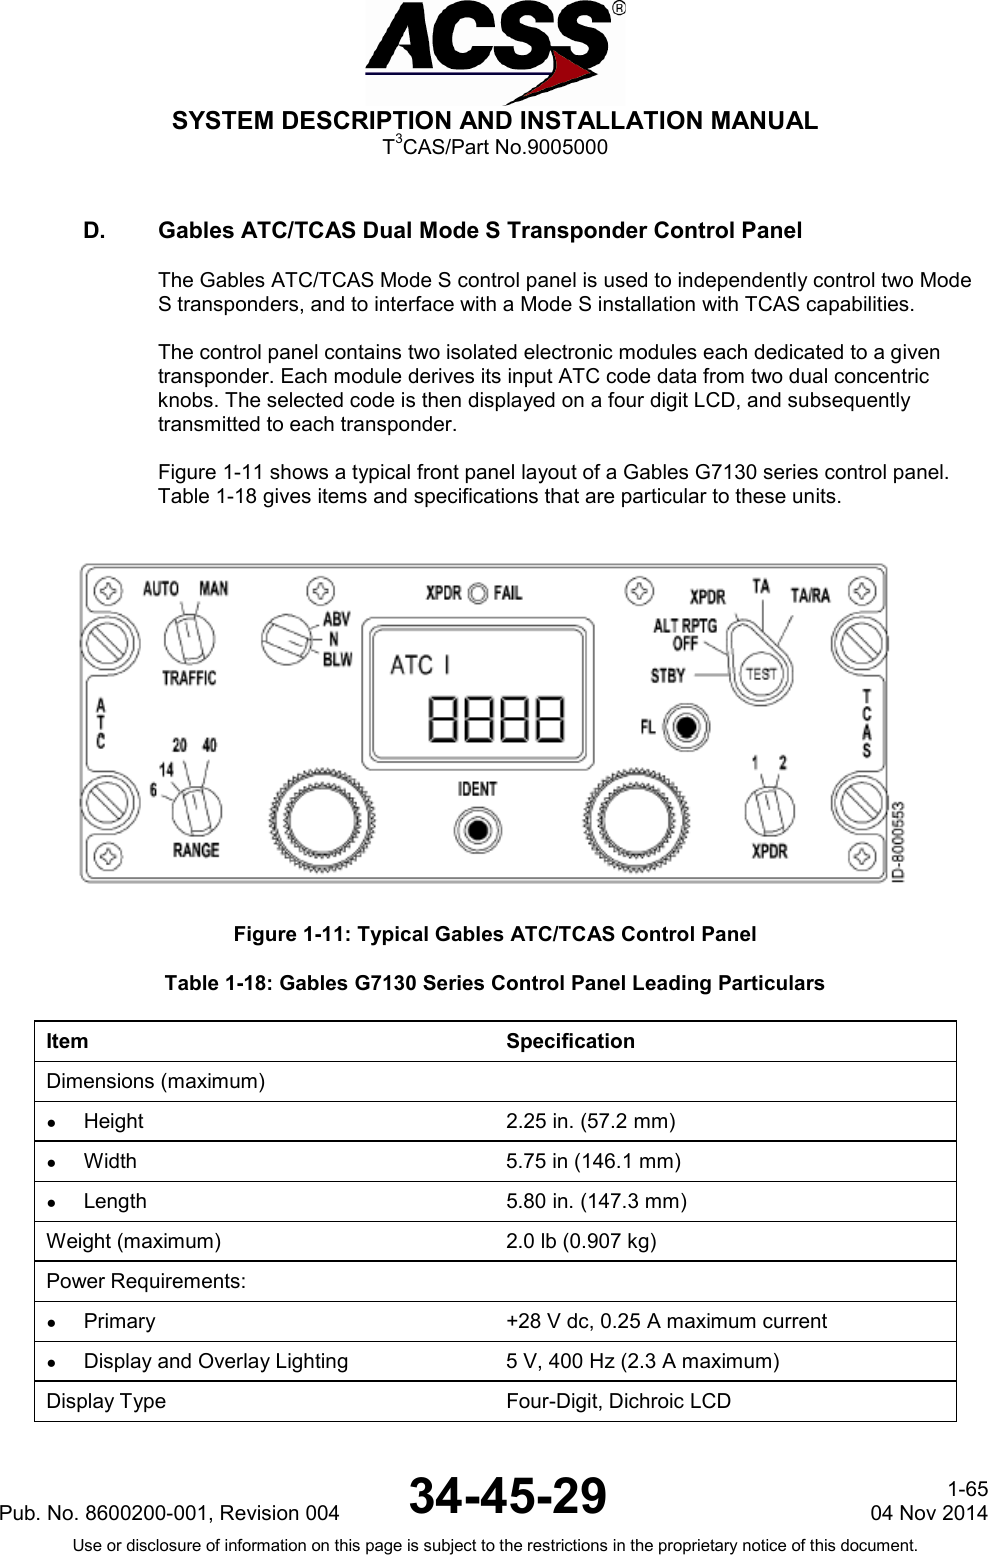  SYSTEM DESCRIPTION AND INSTALLATION MANUAL T3CAS/Part No.9005000 D. Gables ATC/TCAS Dual Mode S Transponder Control Panel The Gables ATC/TCAS Mode S control panel is used to independently control two Mode S transponders, and to interface with a Mode S installation with TCAS capabilities.  The control panel contains two isolated electronic modules each dedicated to a given transponder. Each module derives its input ATC code data from two dual concentric knobs. The selected code is then displayed on a four digit LCD, and subsequently transmitted to each transponder.  Figure 1-11 shows a typical front panel layout of a Gables G7130 series control panel. Table 1-18 gives items and specifications that are particular to these units.   Figure 1-11: Typical Gables ATC/TCAS Control Panel Table 1-18: Gables G7130 Series Control Panel Leading Particulars Item Specification Dimensions (maximum)  ●  Height 2.25 in. (57.2 mm) ●  Width 5.75 in (146.1 mm) ● Length 5.80 in. (147.3 mm) Weight (maximum) 2.0 lb (0.907 kg) Power Requirements:  ●  Primary +28 V dc, 0.25 A maximum current ●  Display and Overlay Lighting 5 V, 400 Hz (2.3 A maximum) Display Type Four-Digit, Dichroic LCD Pub. No. 8600200-001, Revision 004 34-45-29 1-65 04 Nov 2014 Use or disclosure of information on this page is subject to the restrictions in the proprietary notice of this document.  